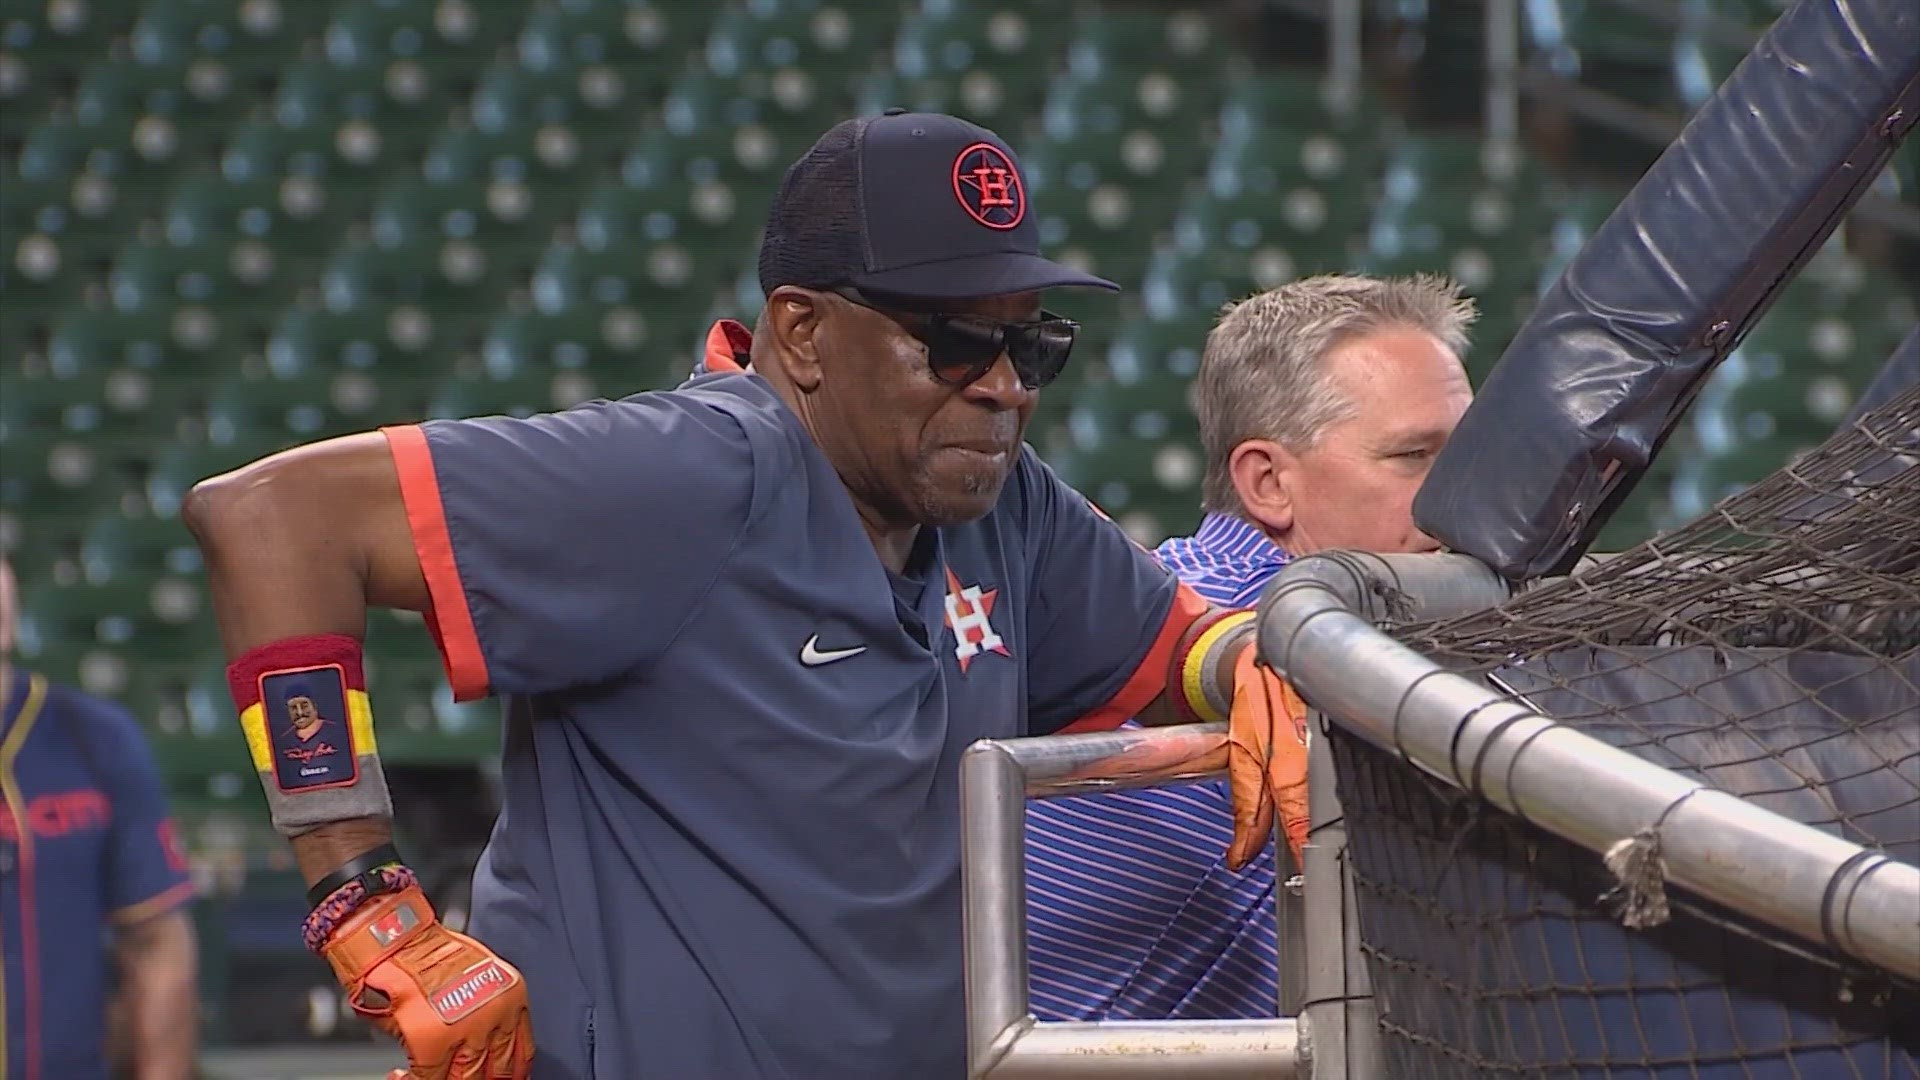 Dusty Baker is retiring after spending four years managing the Houston Astros, according to Bob Nightengale.